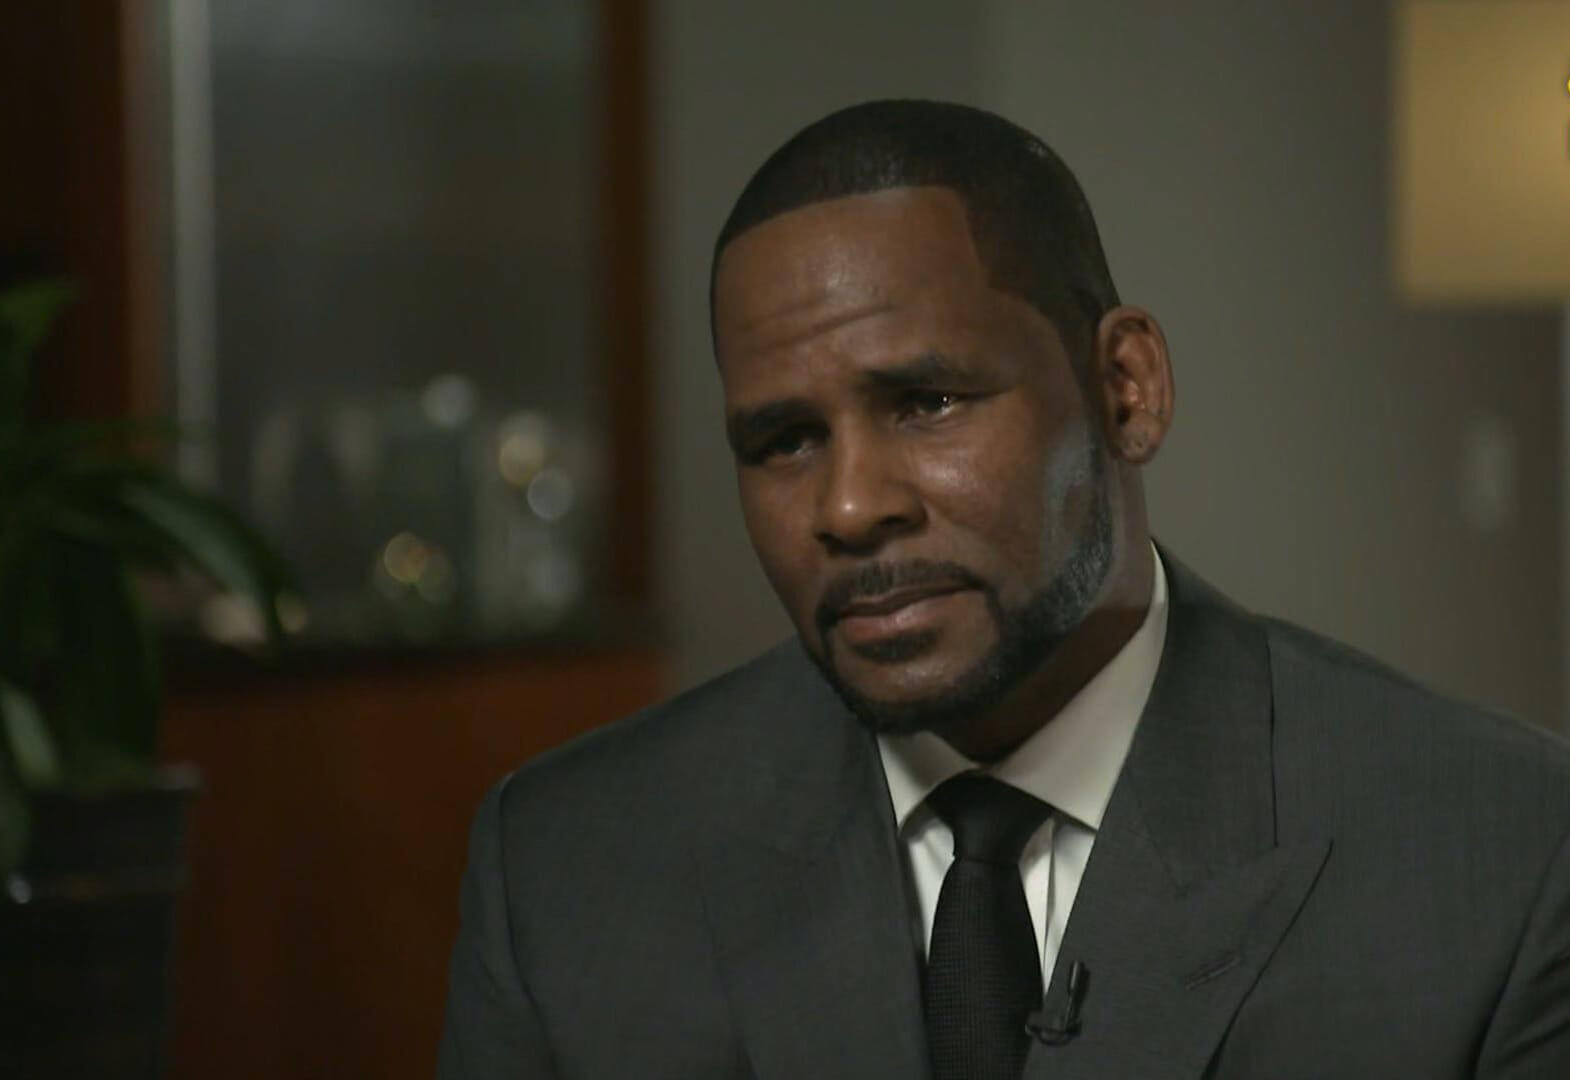 Angry Inmate Attacks R. Kelly After His Supporters Cause Lockdown At Prison